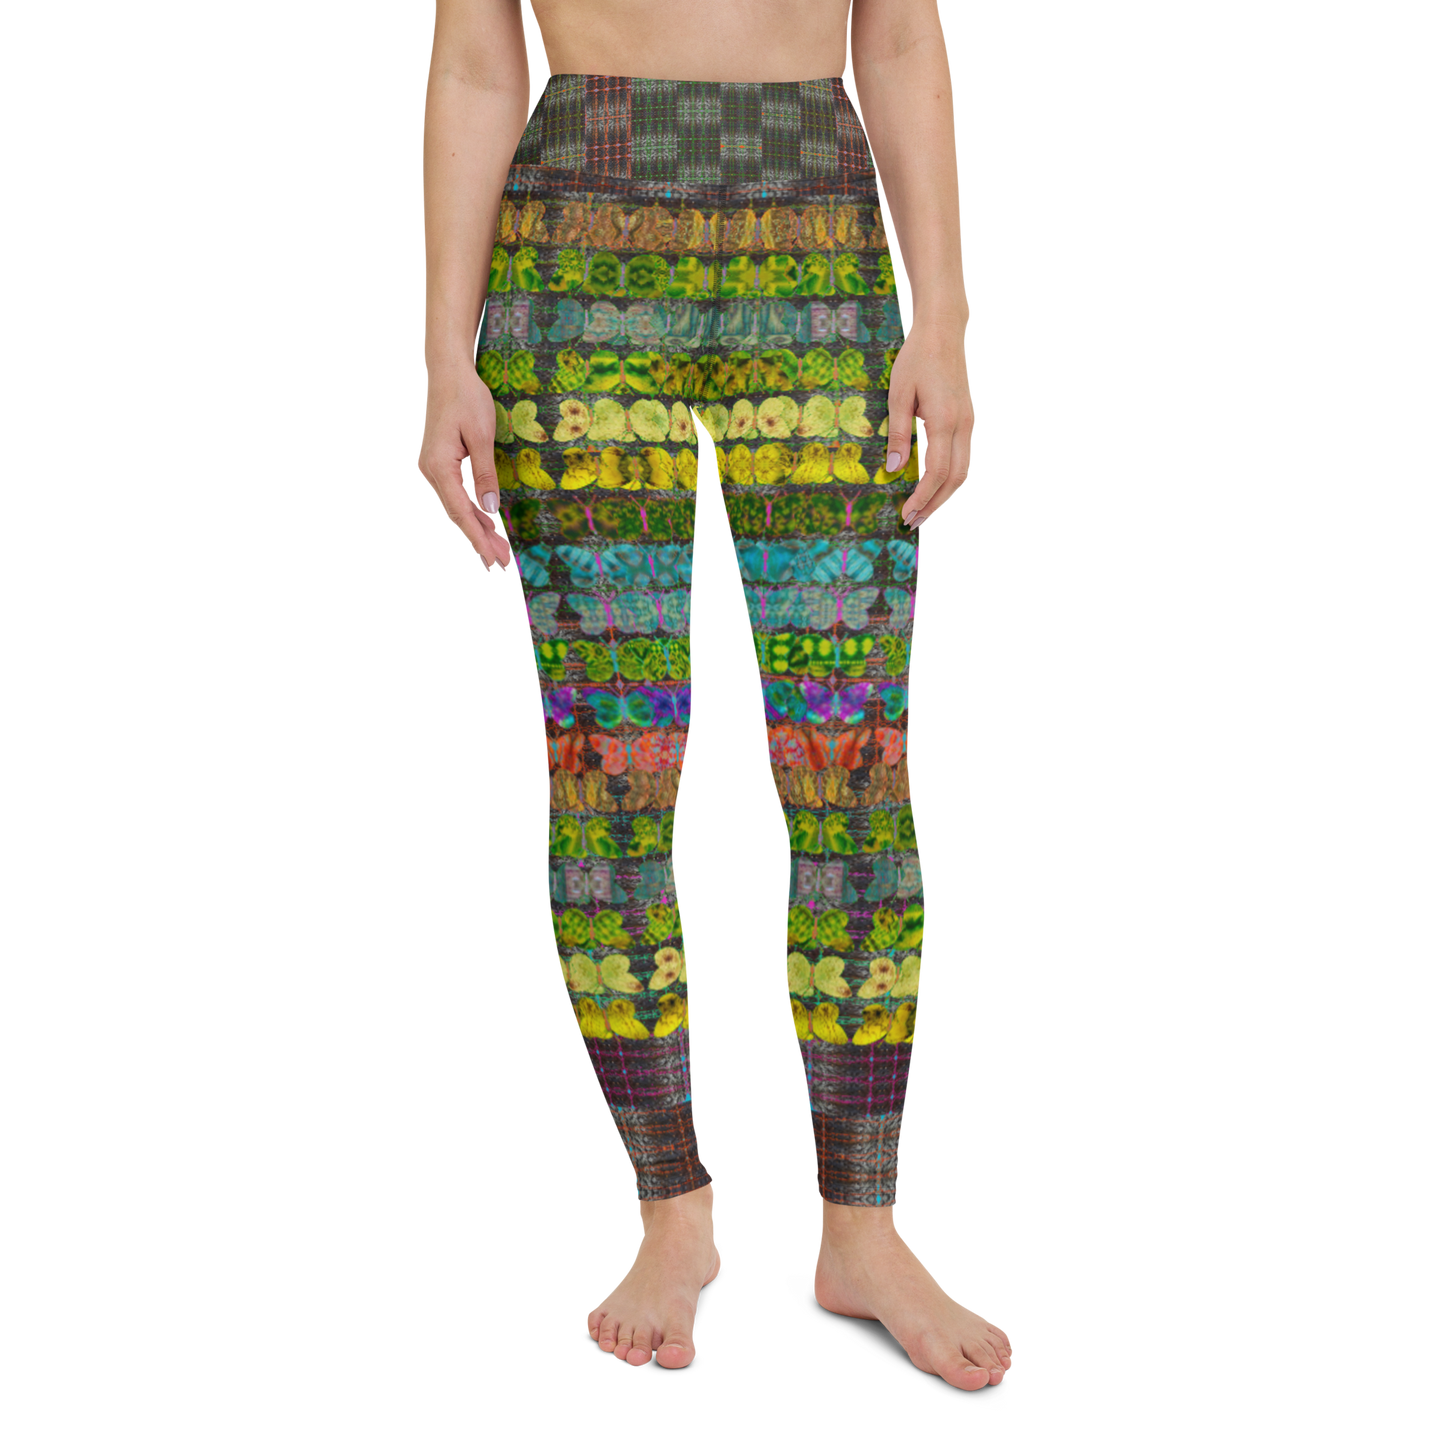 Yoga Leggings (Her/They)(Butterfly Glade Tree Link Pride Stripes) RJSTHs2022 RJS